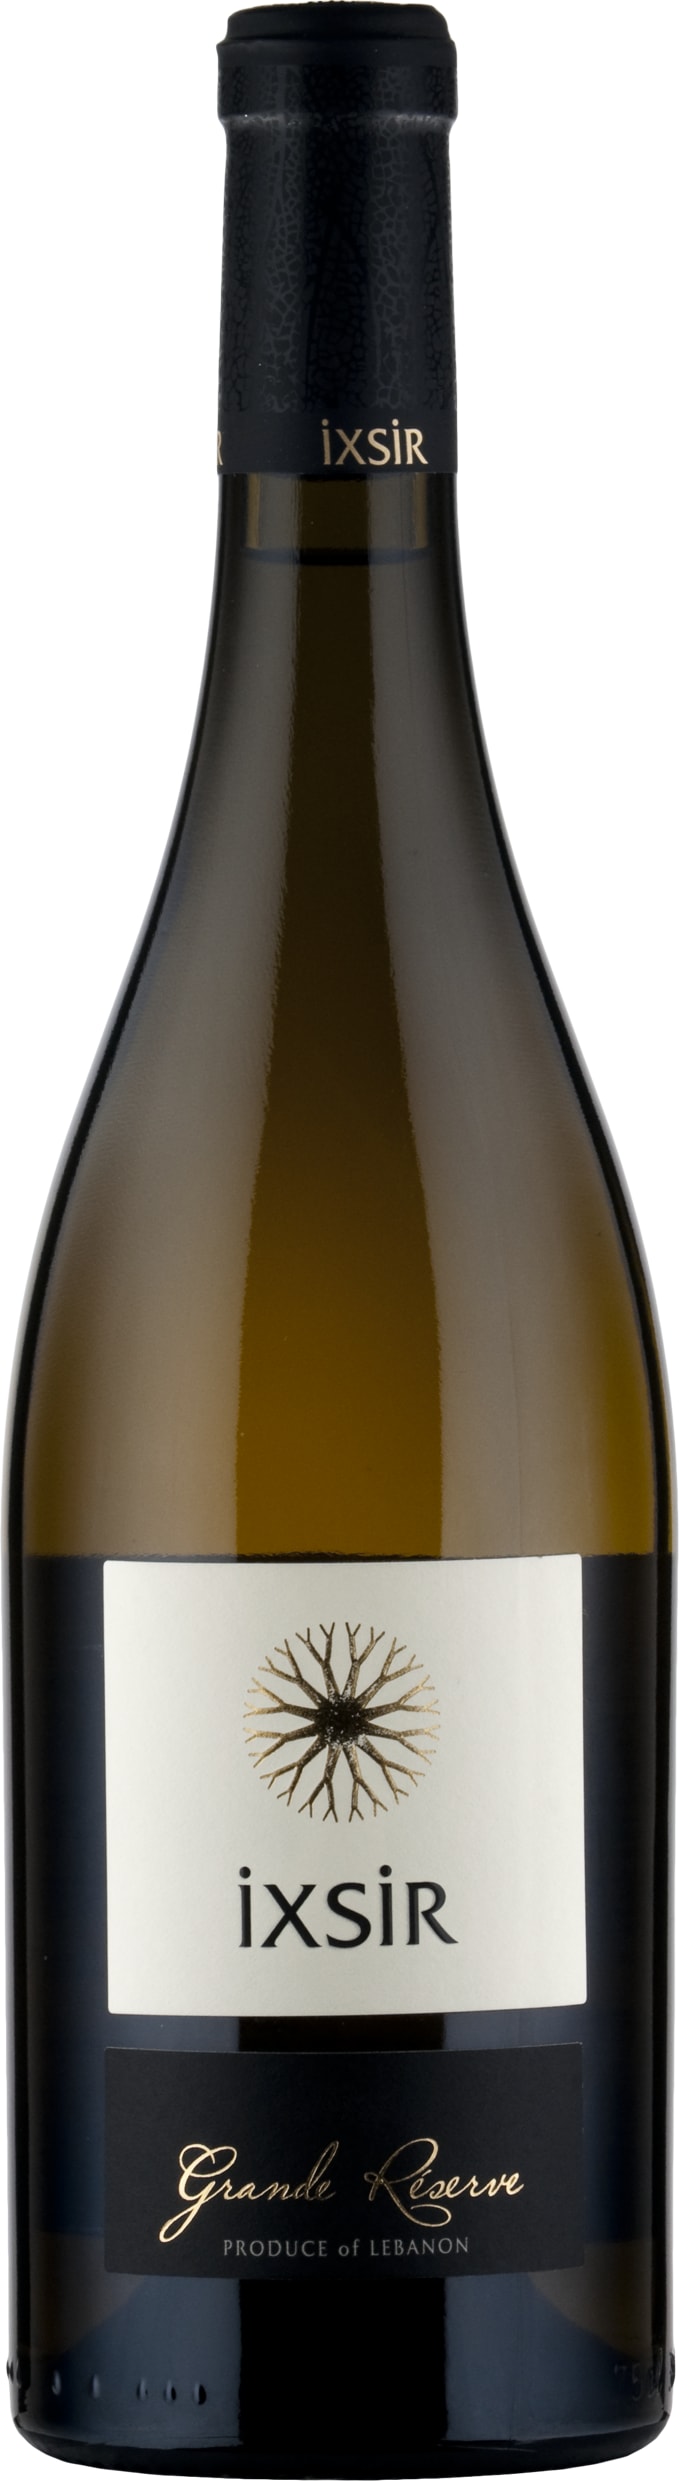 Ixsir Grande Reserve White 2022 75cl - Buy Ixsir Wines from GREAT WINES DIRECT wine shop